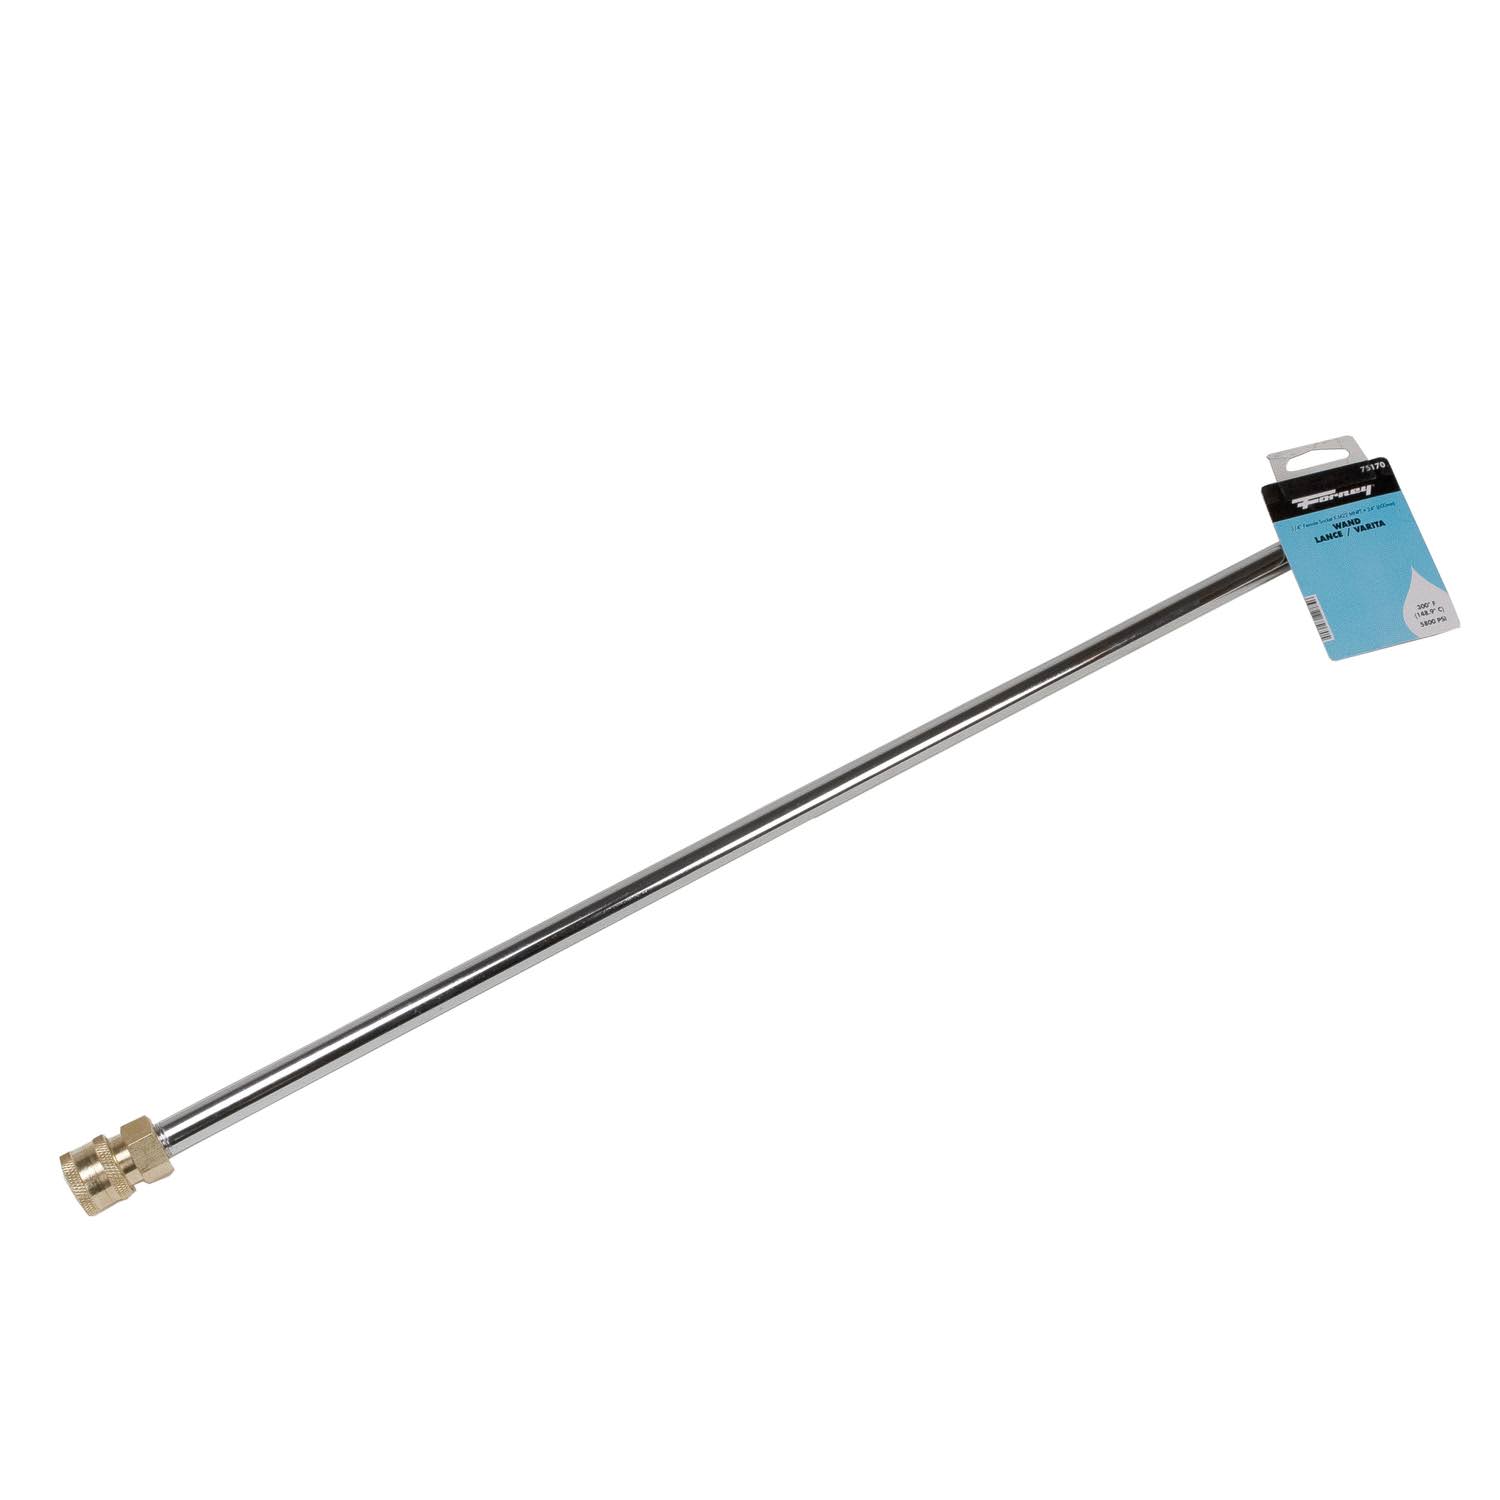 Forney Replacement Pressure Washer Wand 5800 PSI